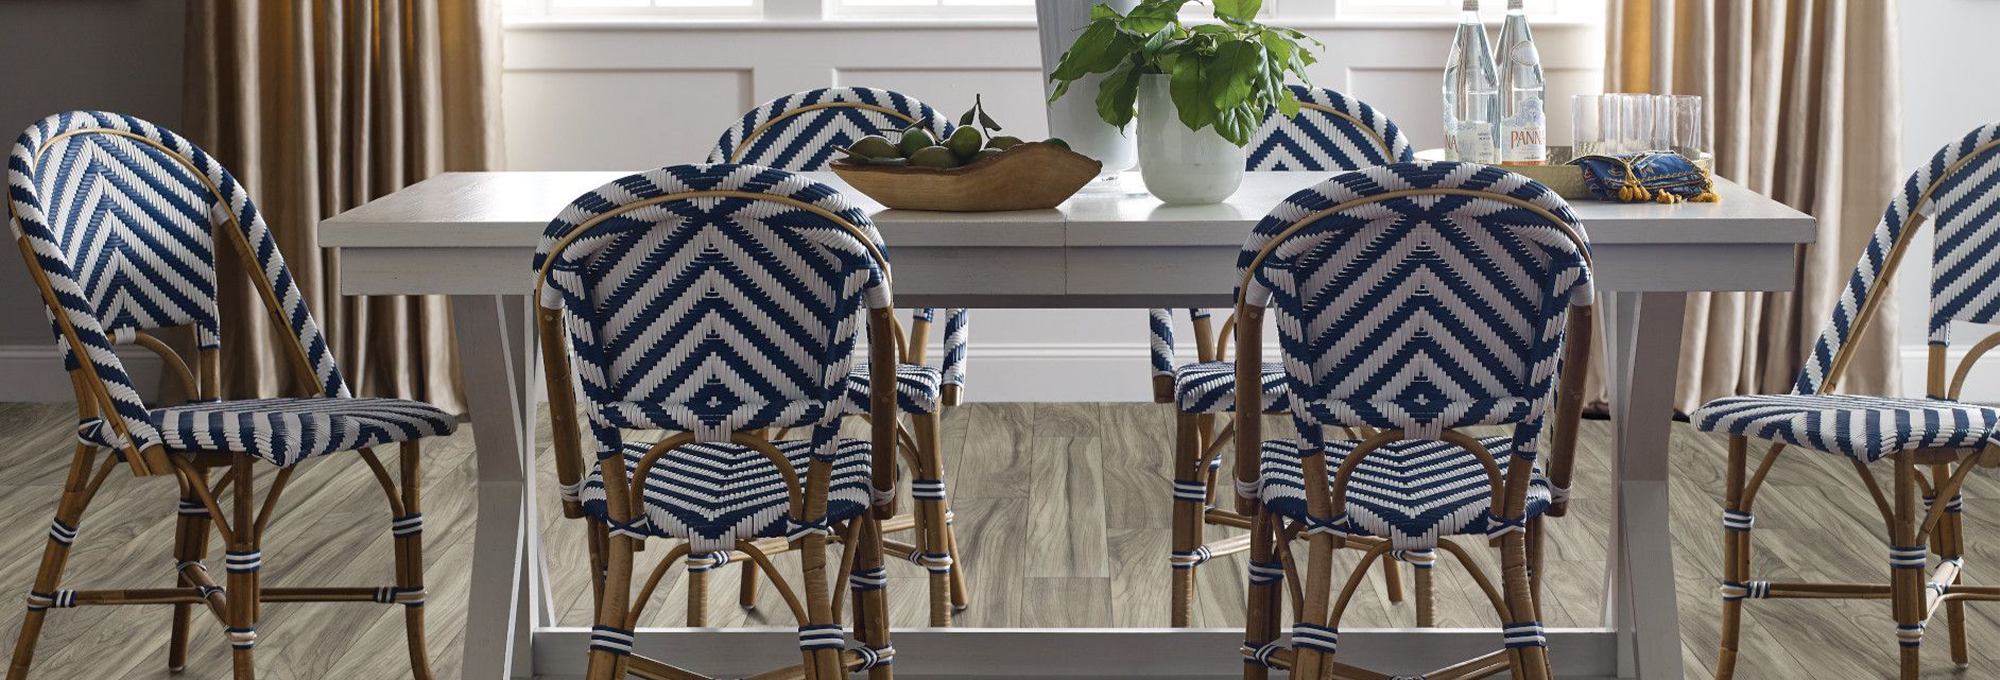 Dining room with woven blue chairs